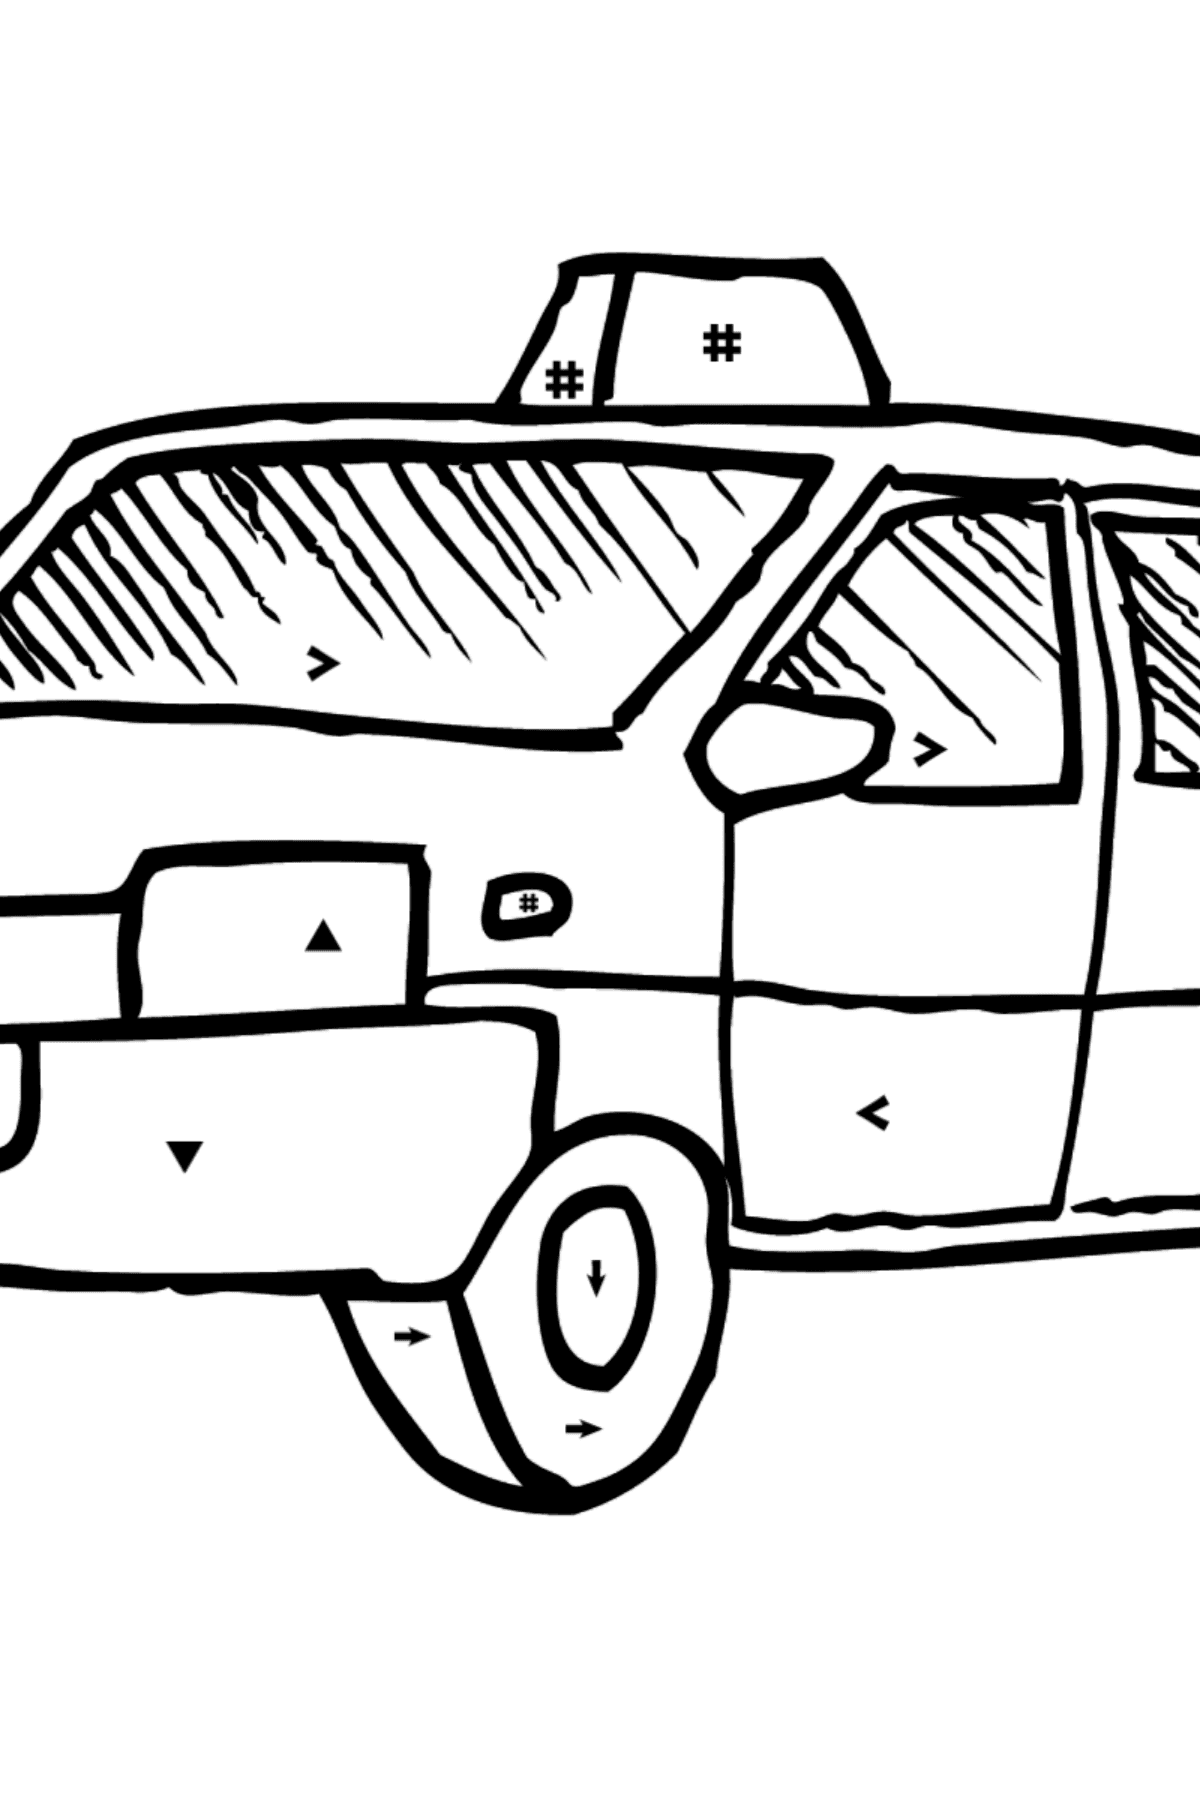 Coloring Page - A Yellow Taxi - Coloring by Symbols for Kids